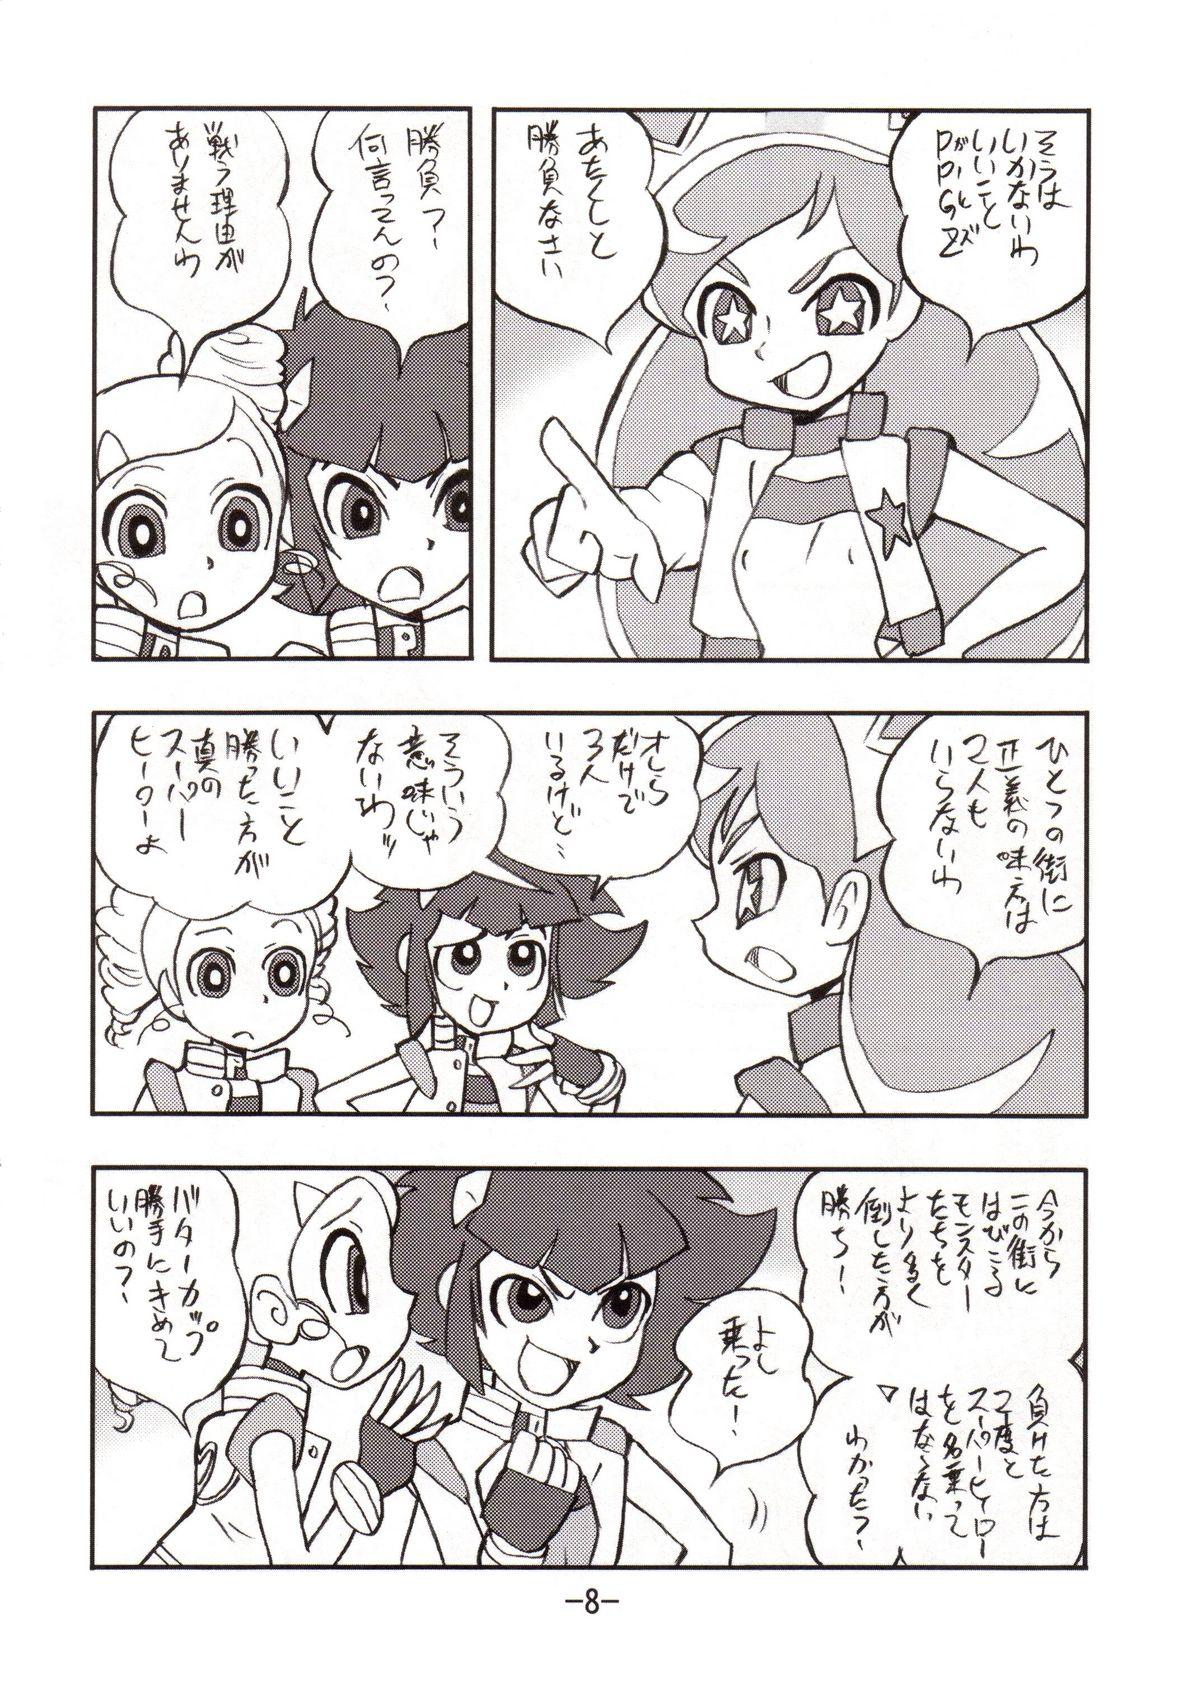 Top princess wishes vol. 2 - Powerpuff girls z First - Page 7